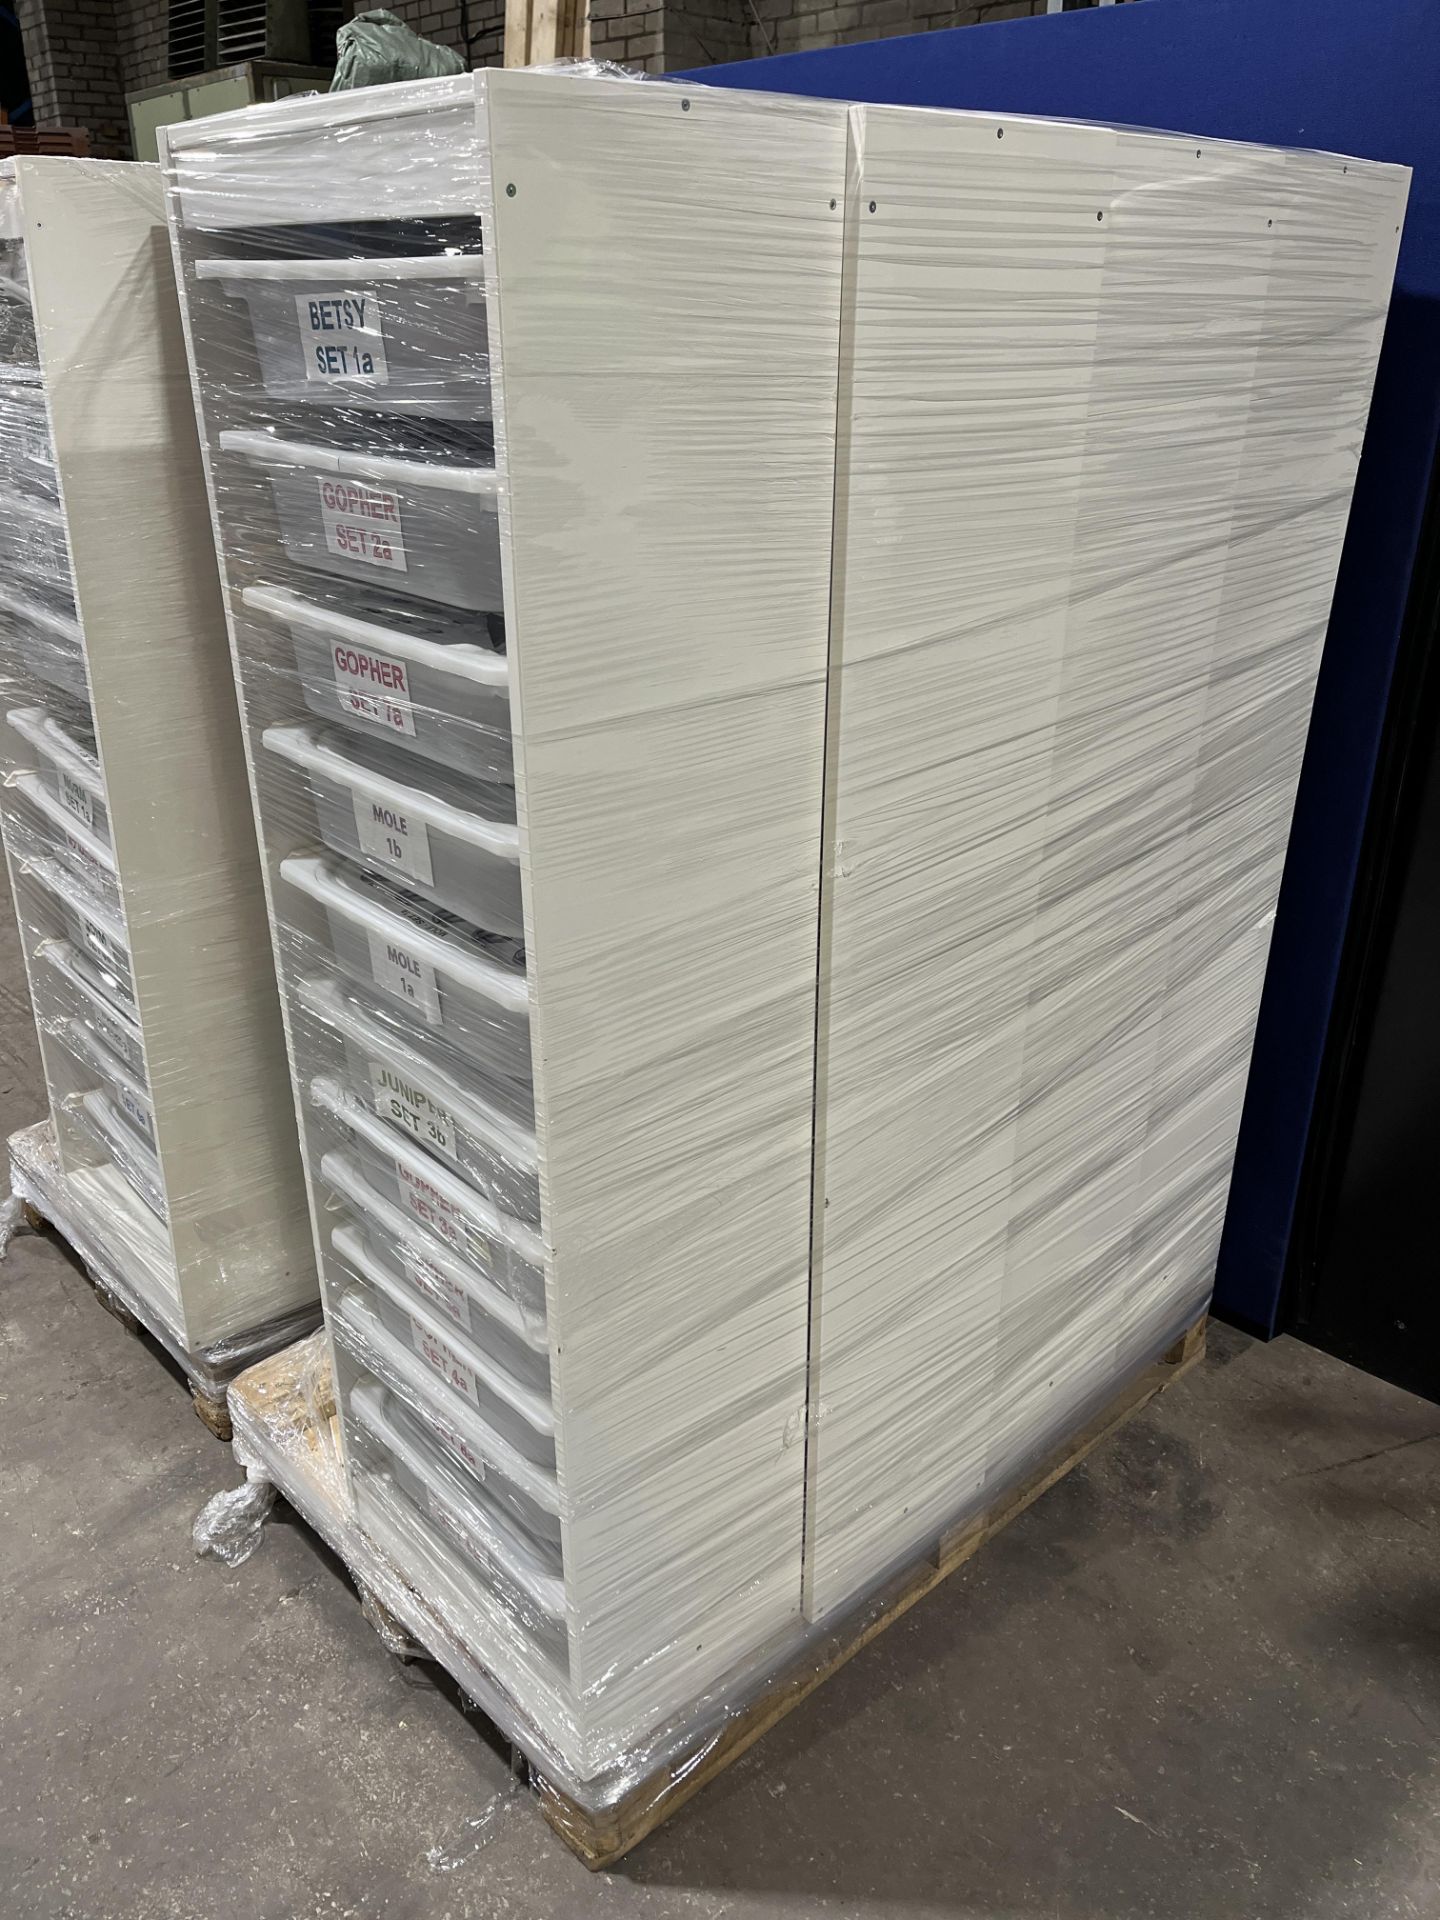 3 x Pallets of Puppets, Costumes and Accessories for TV Animation 'Norman Picklestripes' - Image 14 of 17